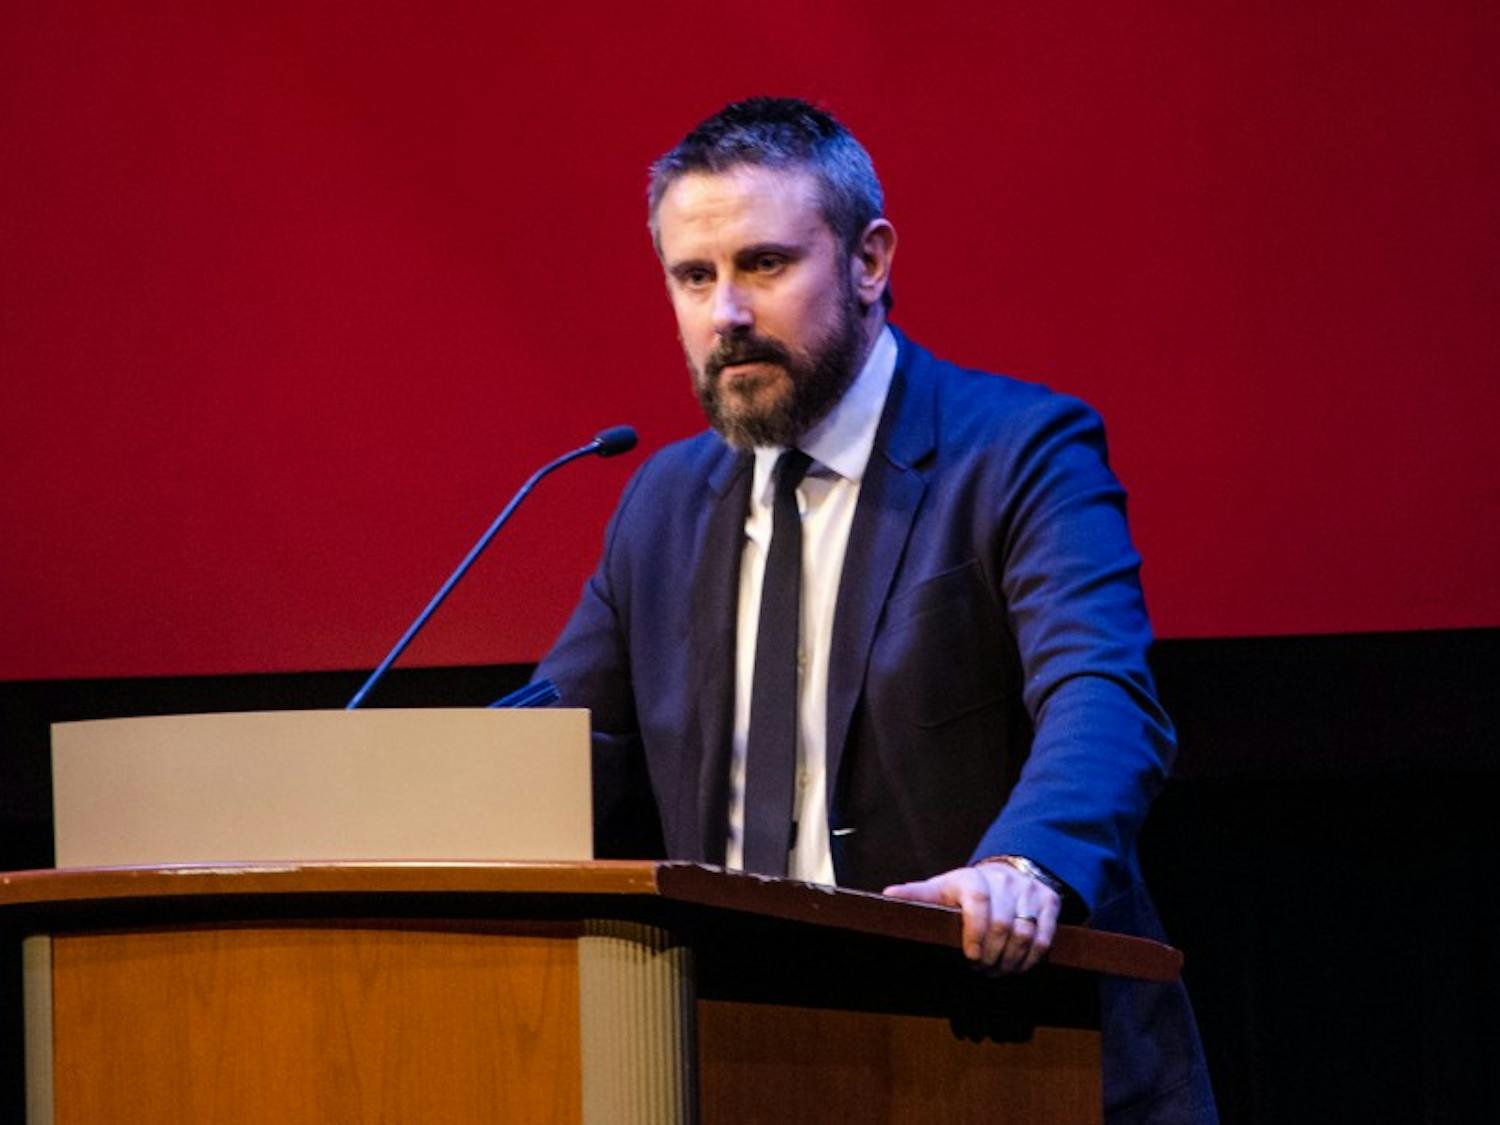 Jeremy Scahill &mdash; an investigative reporter, war correspondent and former UW System student &mdash; spoke Tuesday evening about the current state of the media and the importance of holding governmental organizations accountable.